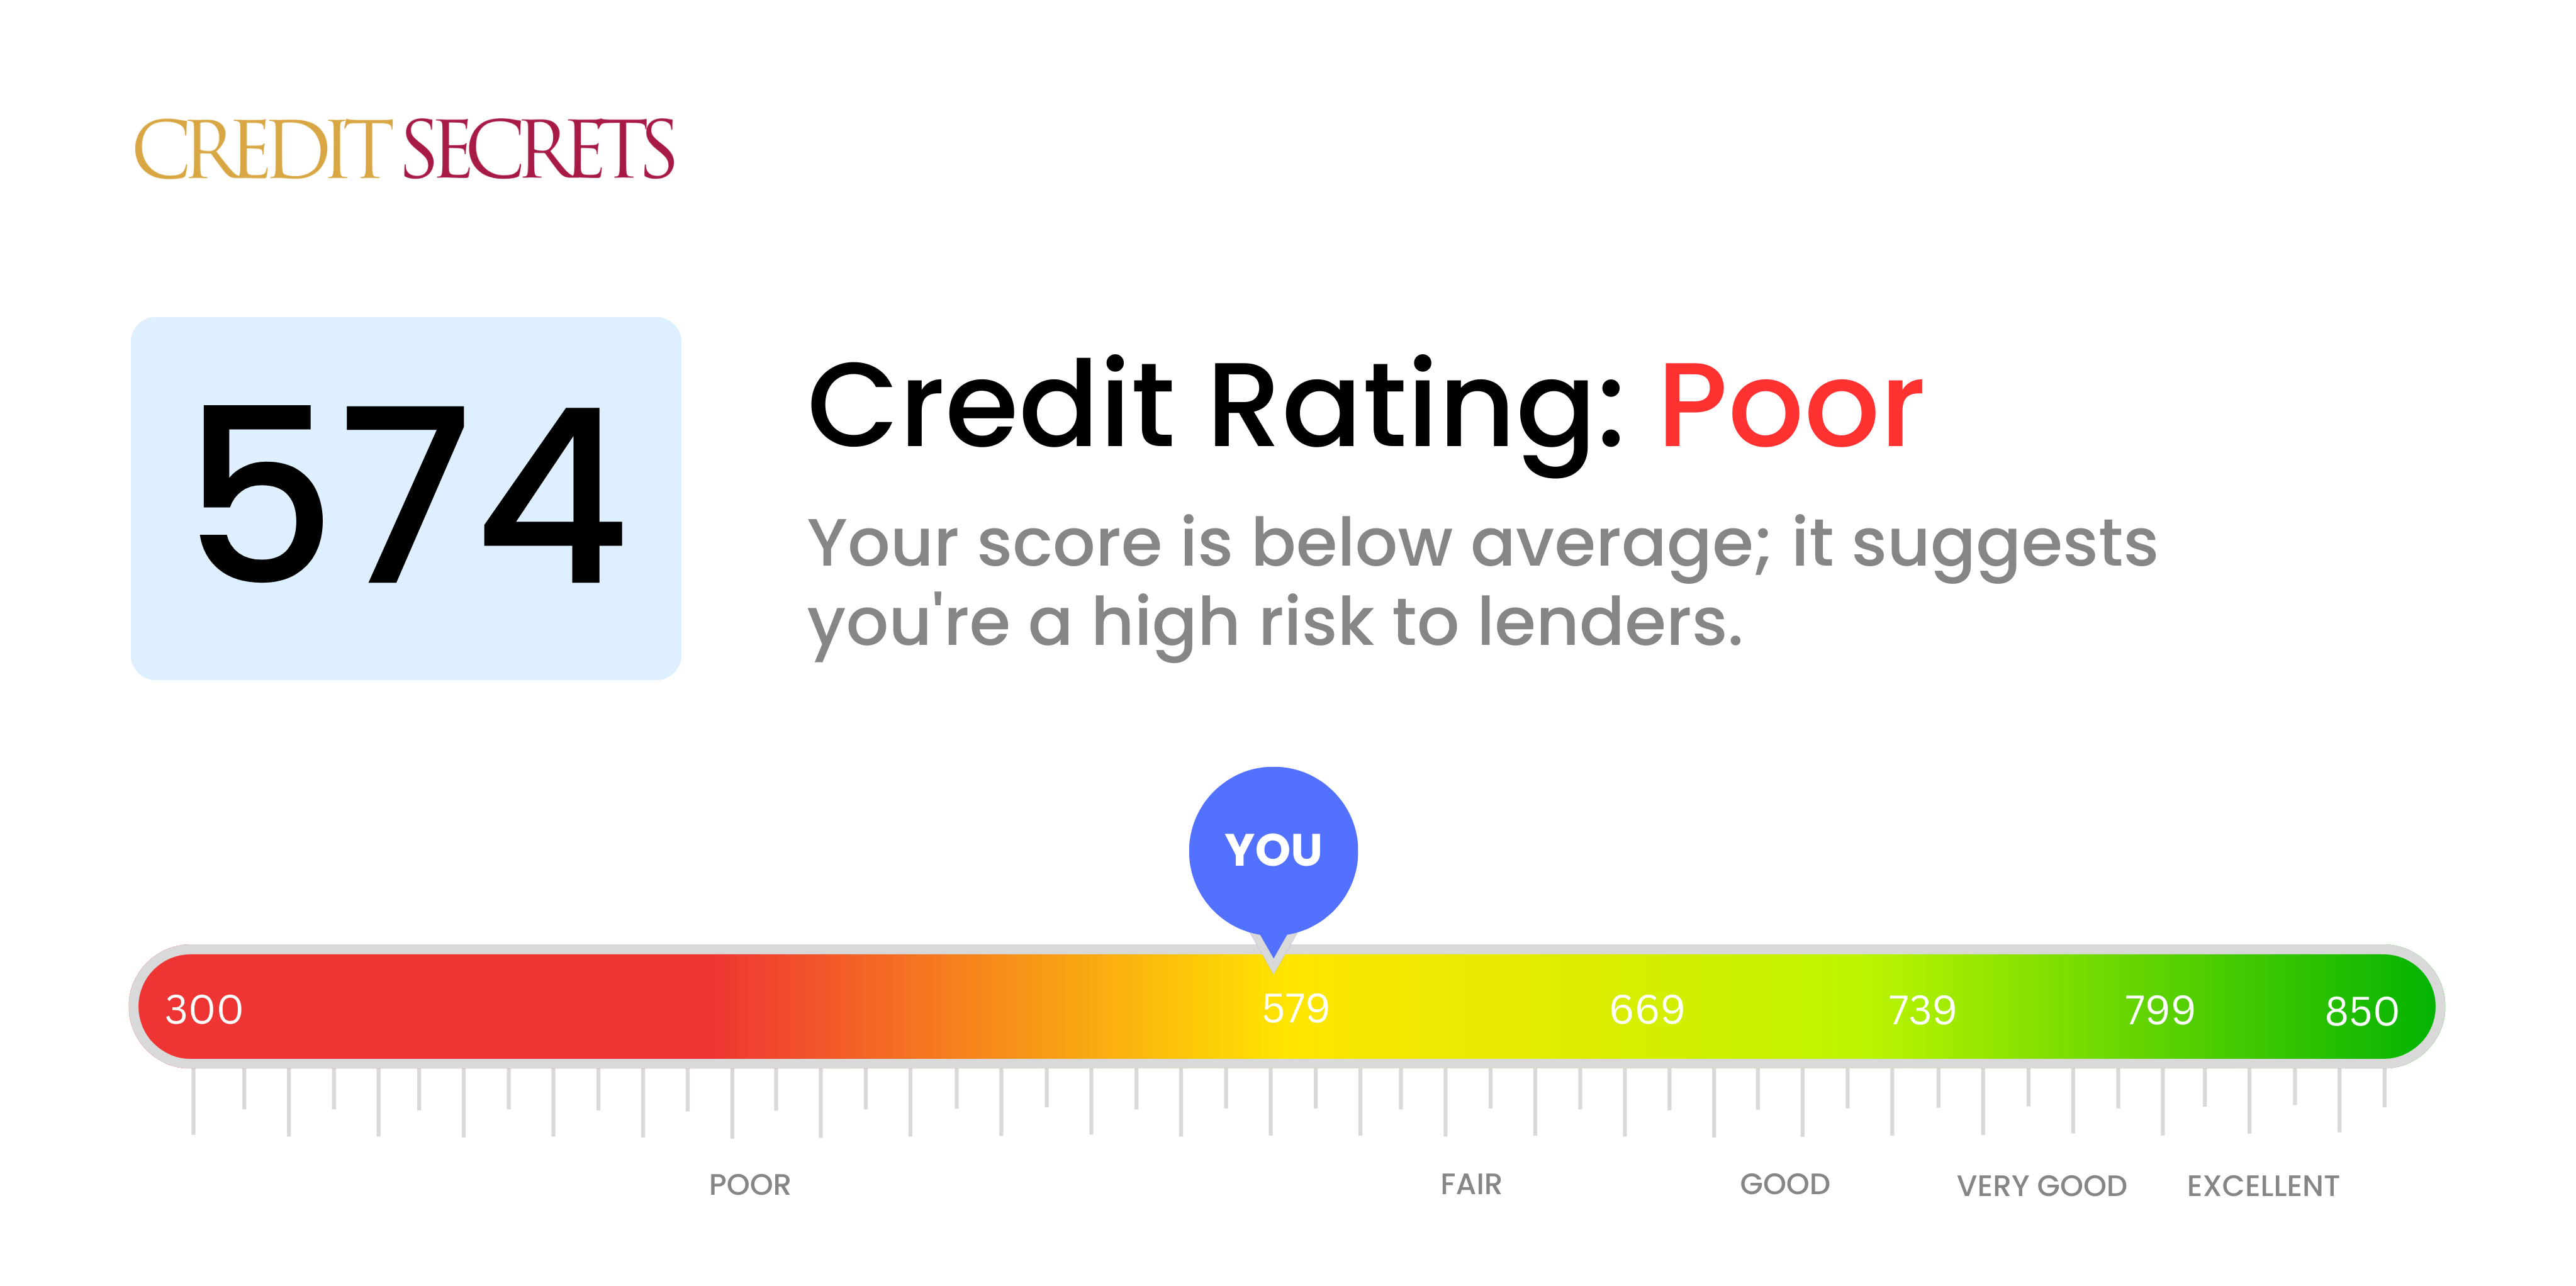 Is 574 a good credit score?